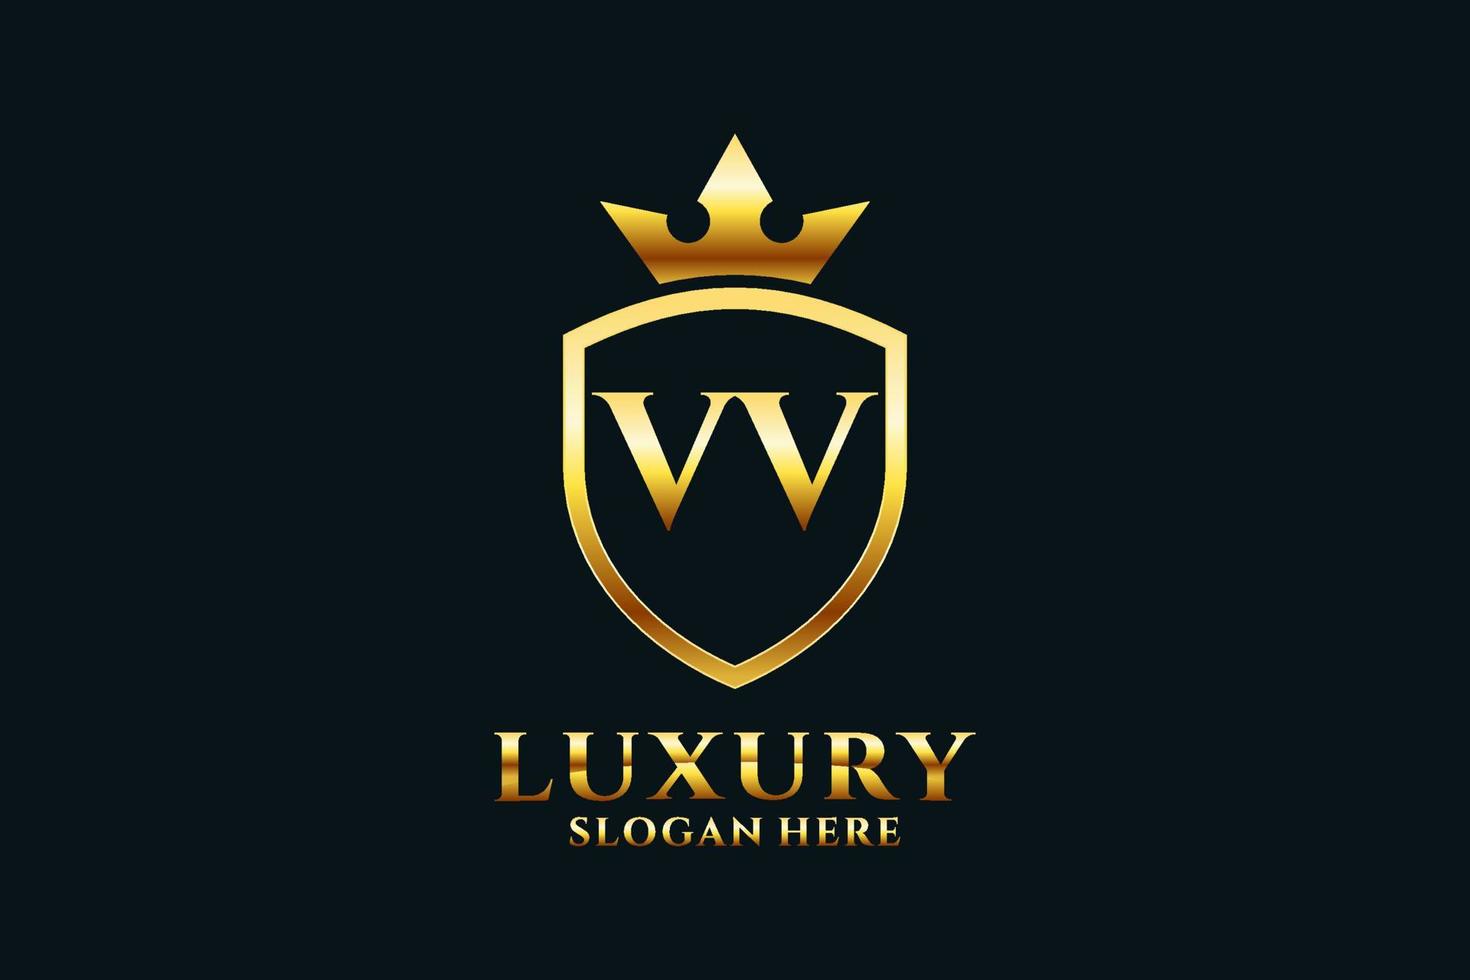 initial VV elegant luxury monogram logo or badge template with scrolls and royal crown - perfect for luxurious branding projects vector